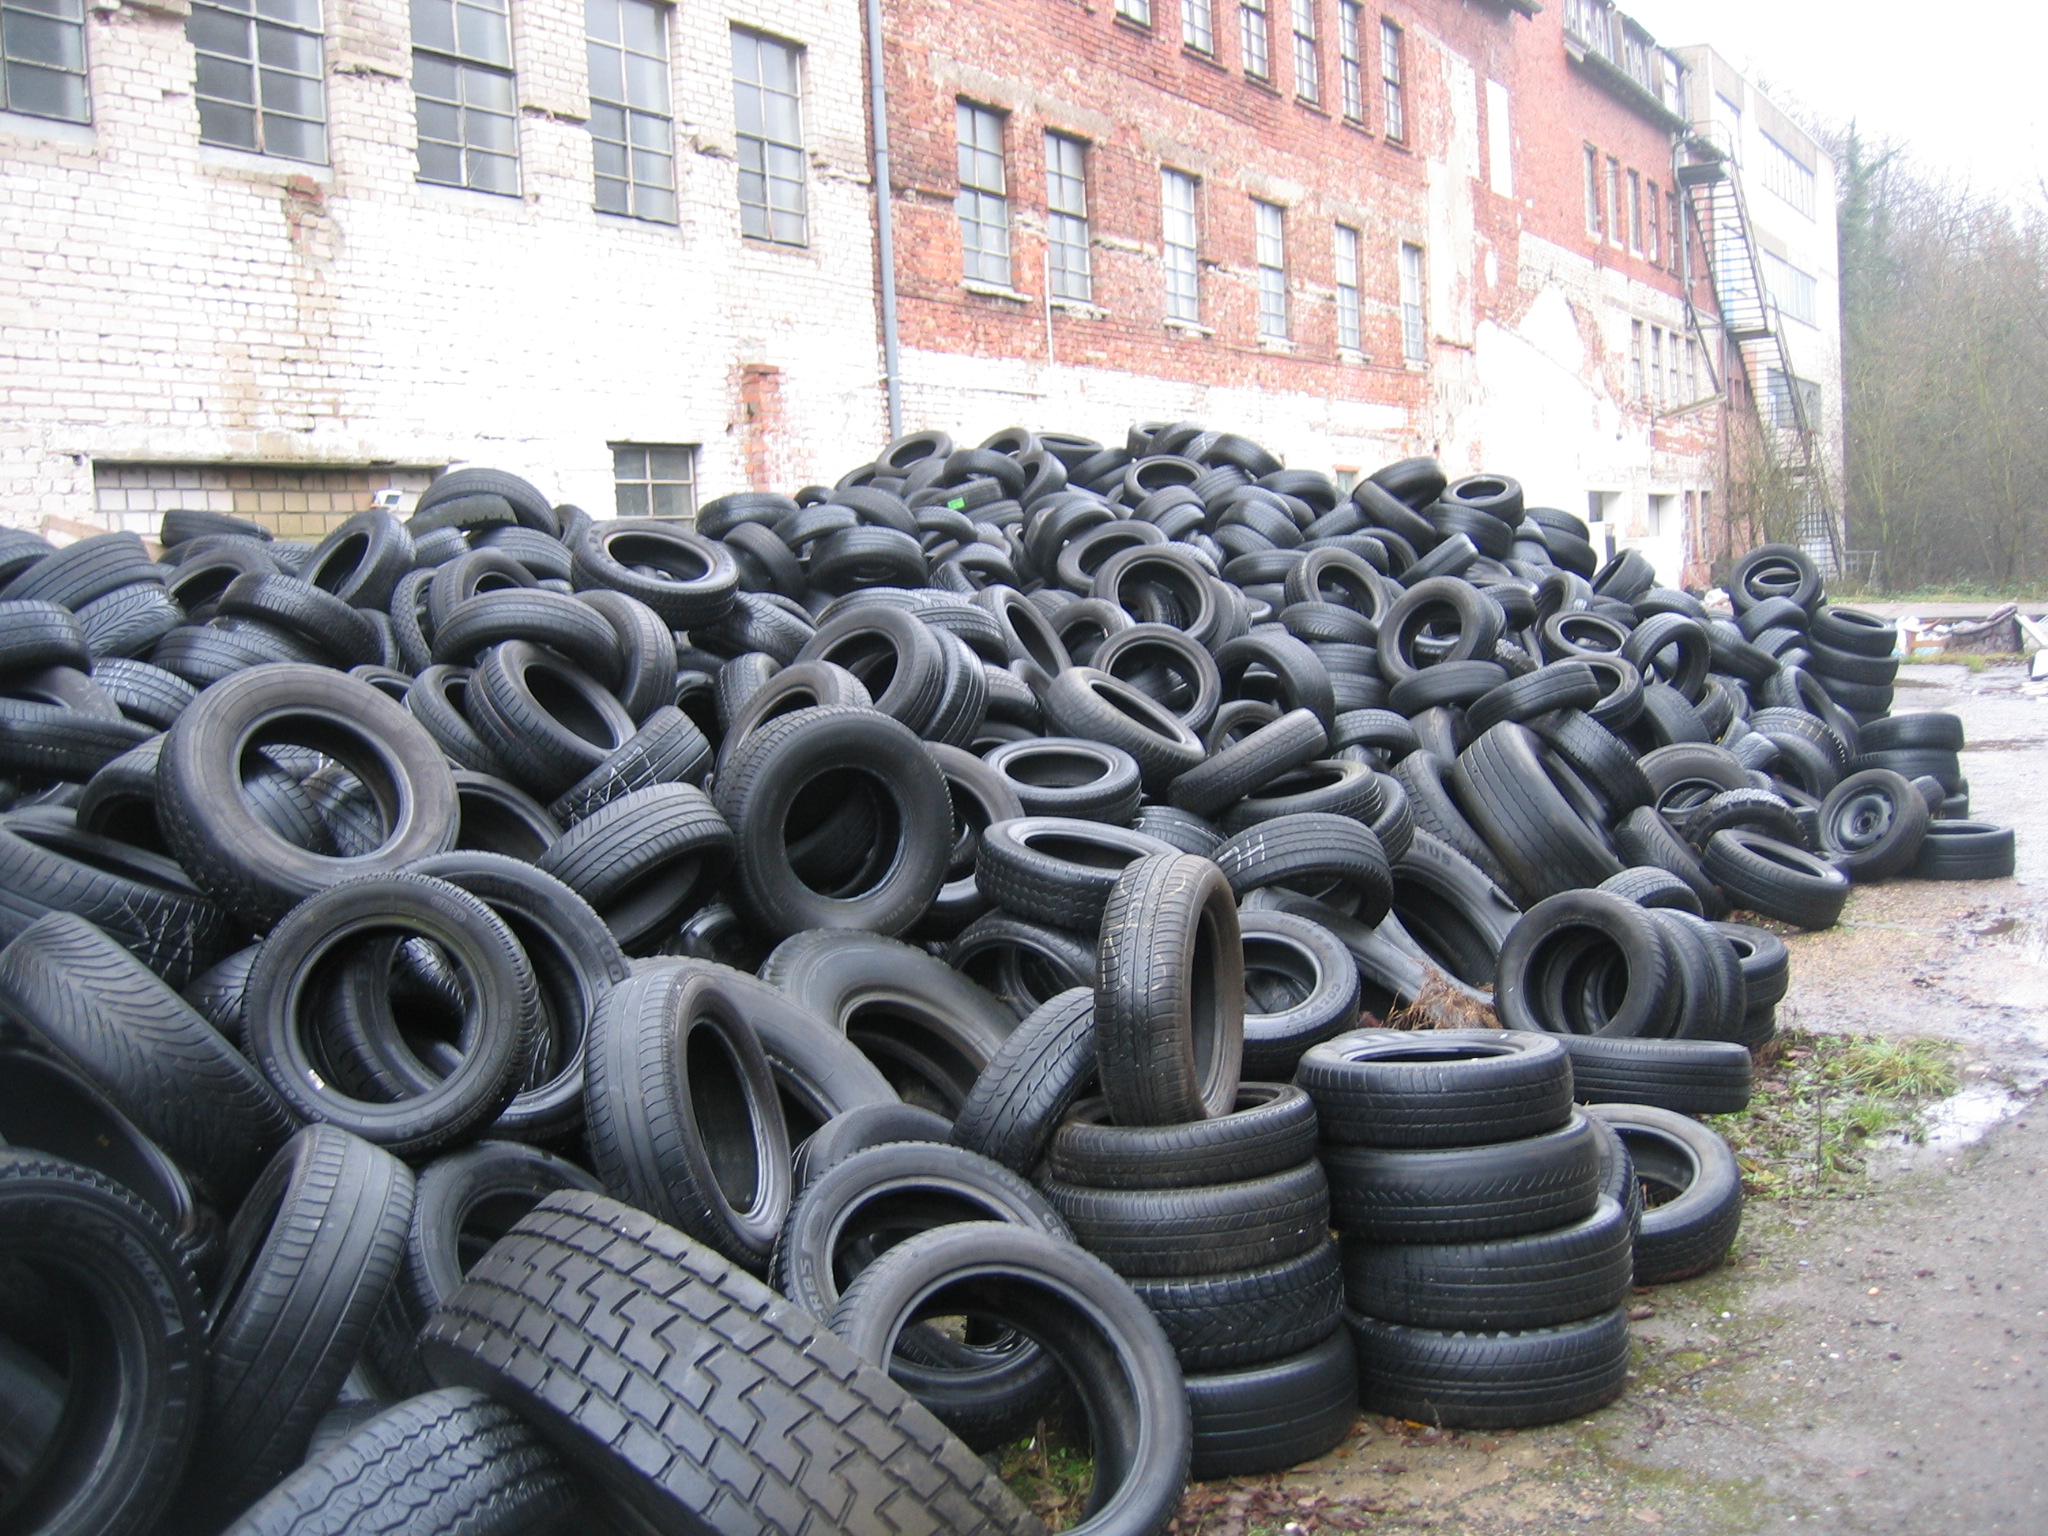 The Wheel Truth About Tire Recycling Fees - The Tires-Easy Blog